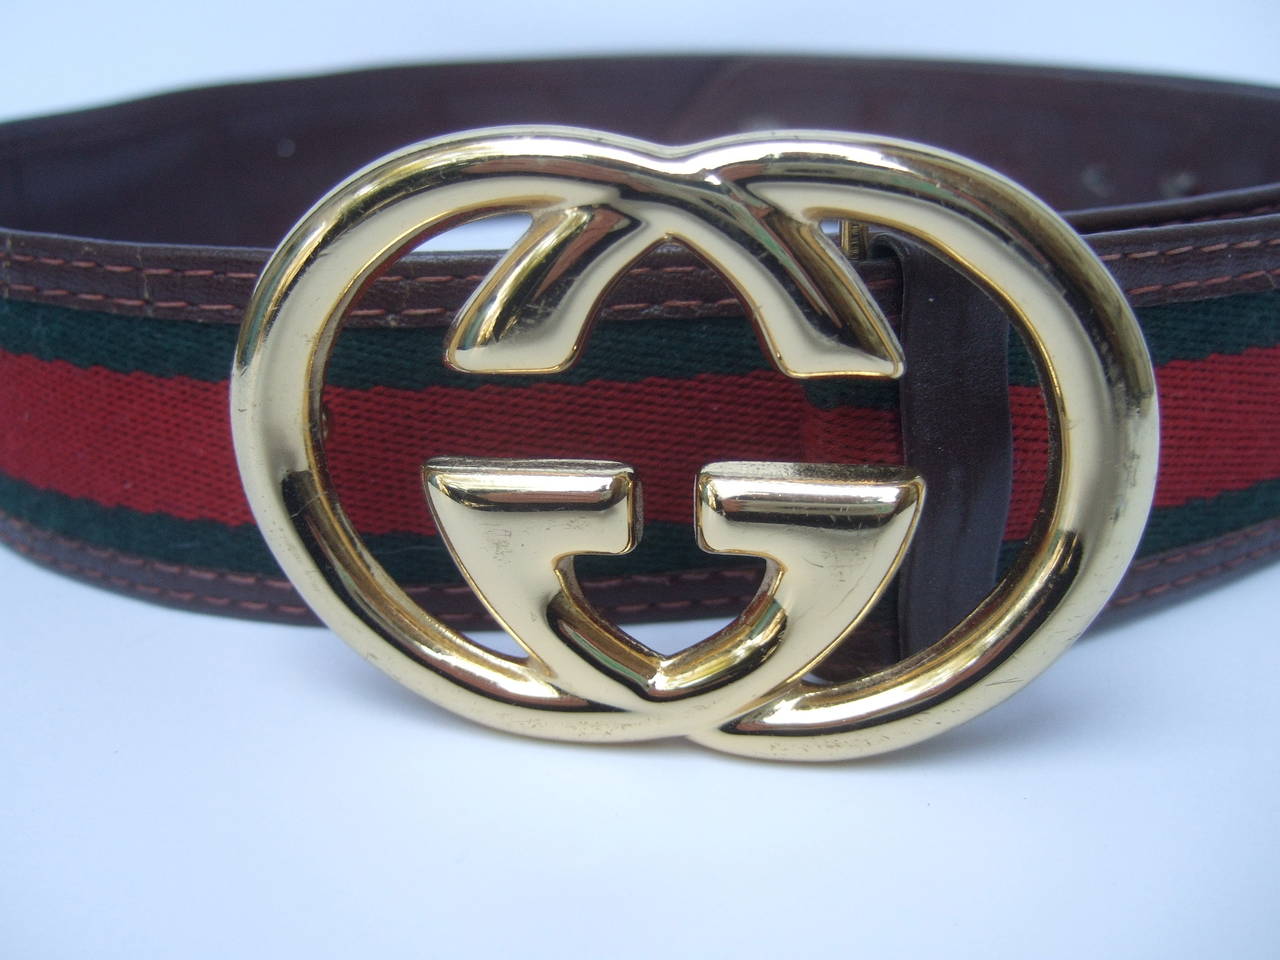 gucci belt red and green gold buckle